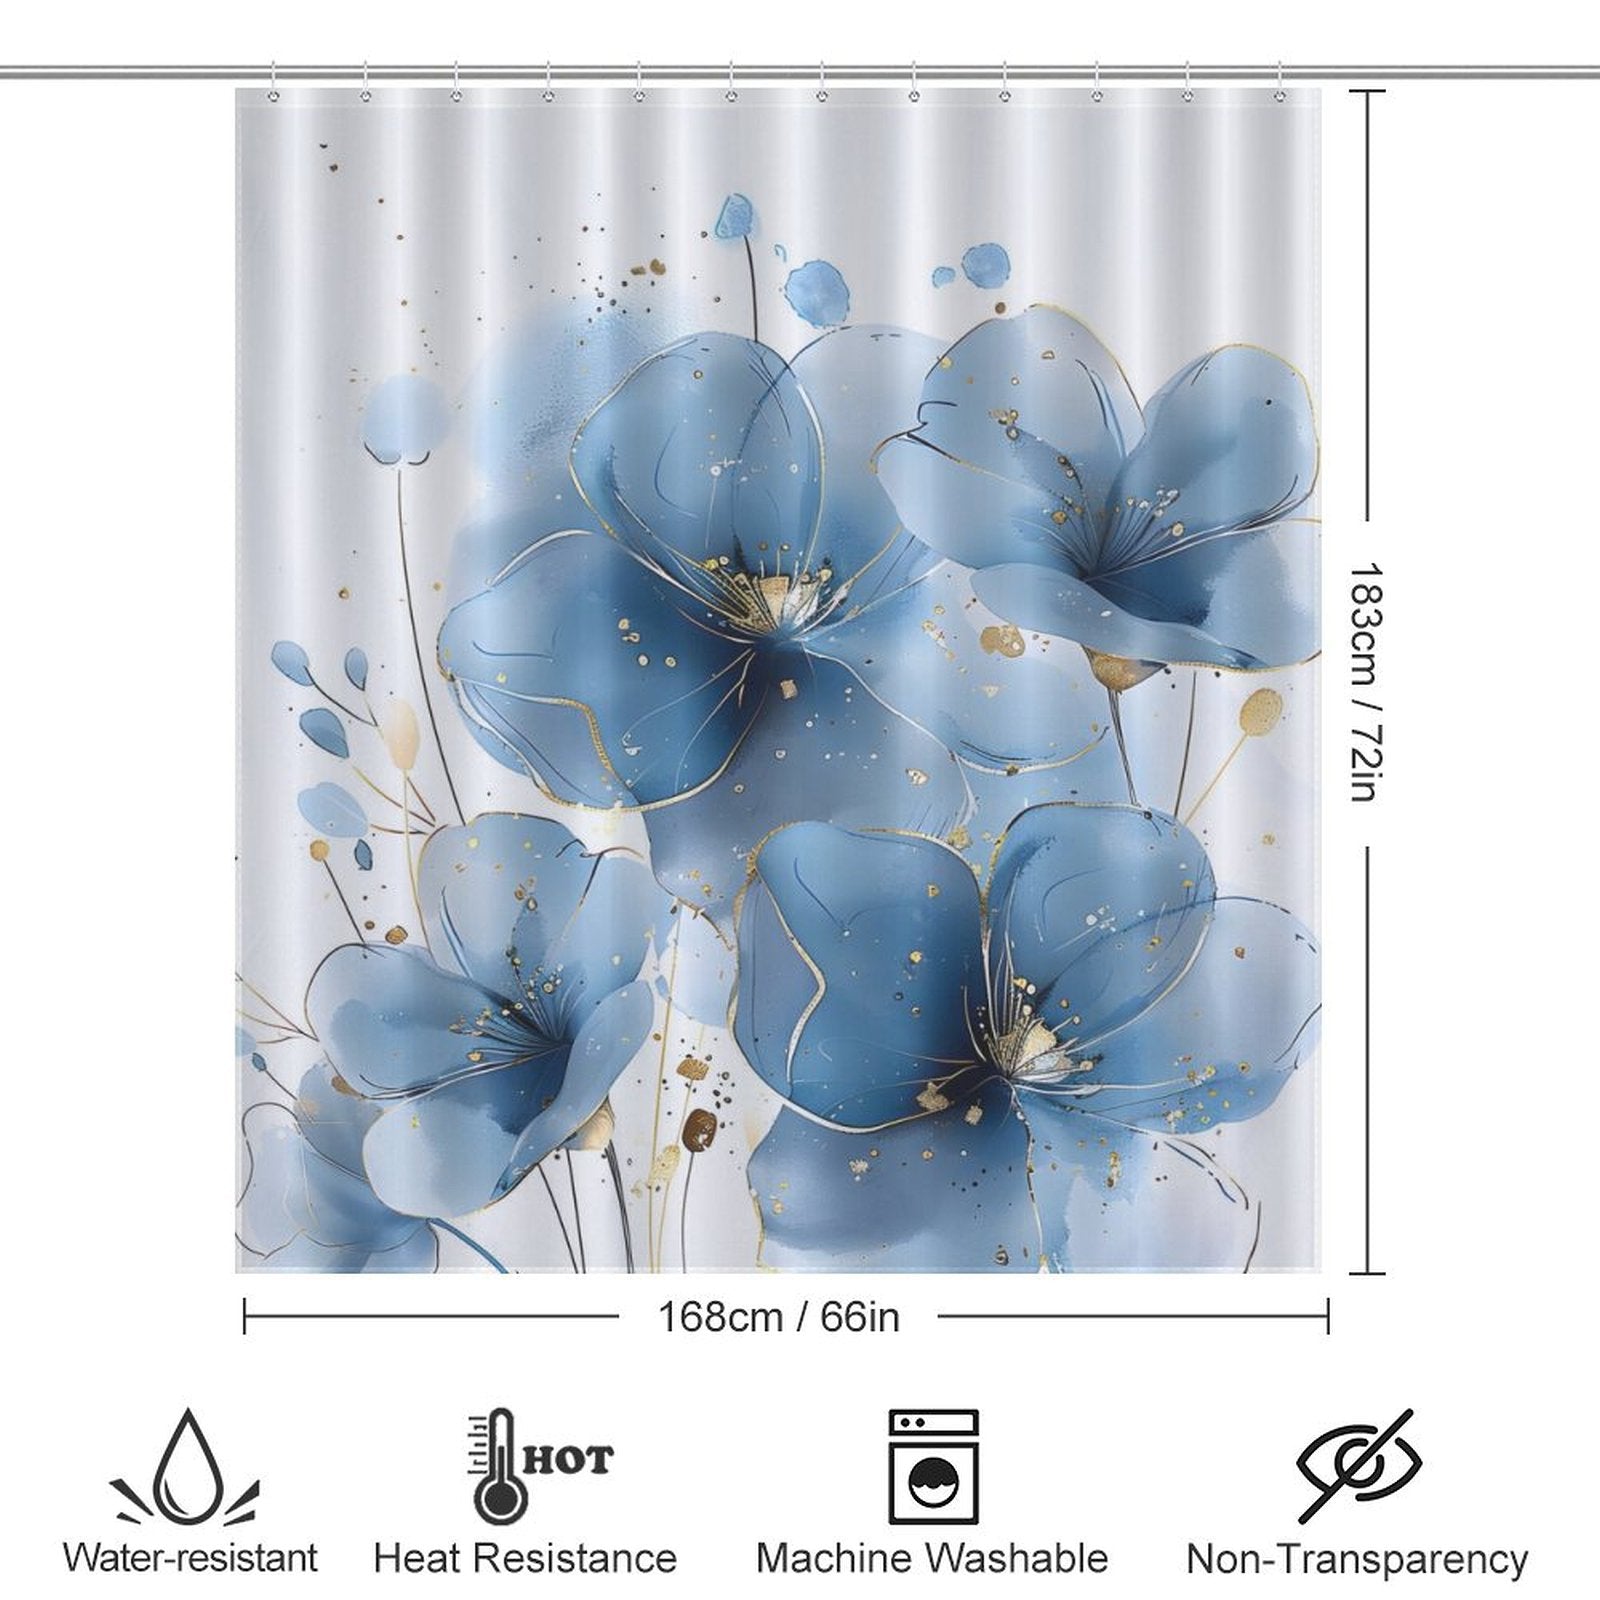 A minimalist watercolor blue floral shower curtain, the Abstract Modern Art Blue Flower Minimalist Watercolor Blue Floral Shower Curtain-Cottoncat by Cotton Cat, measuring 66 inches by 72 inches, boasts water-resistant, heat-resistant, machine washable, and non-transparency features.